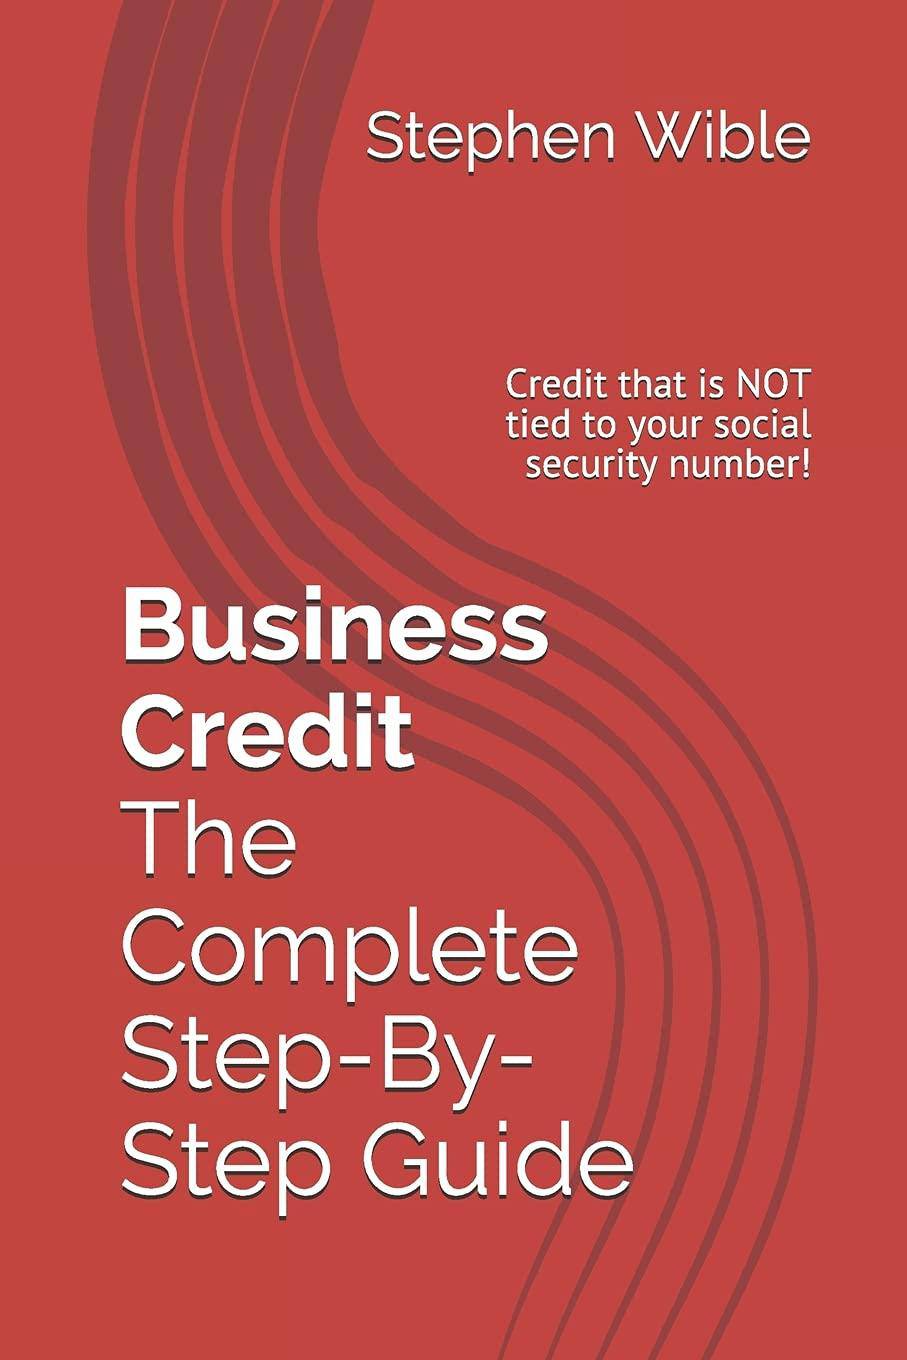 Business Credit the Complete Step-By-Step Guide - SureShot Books Publishing LLC